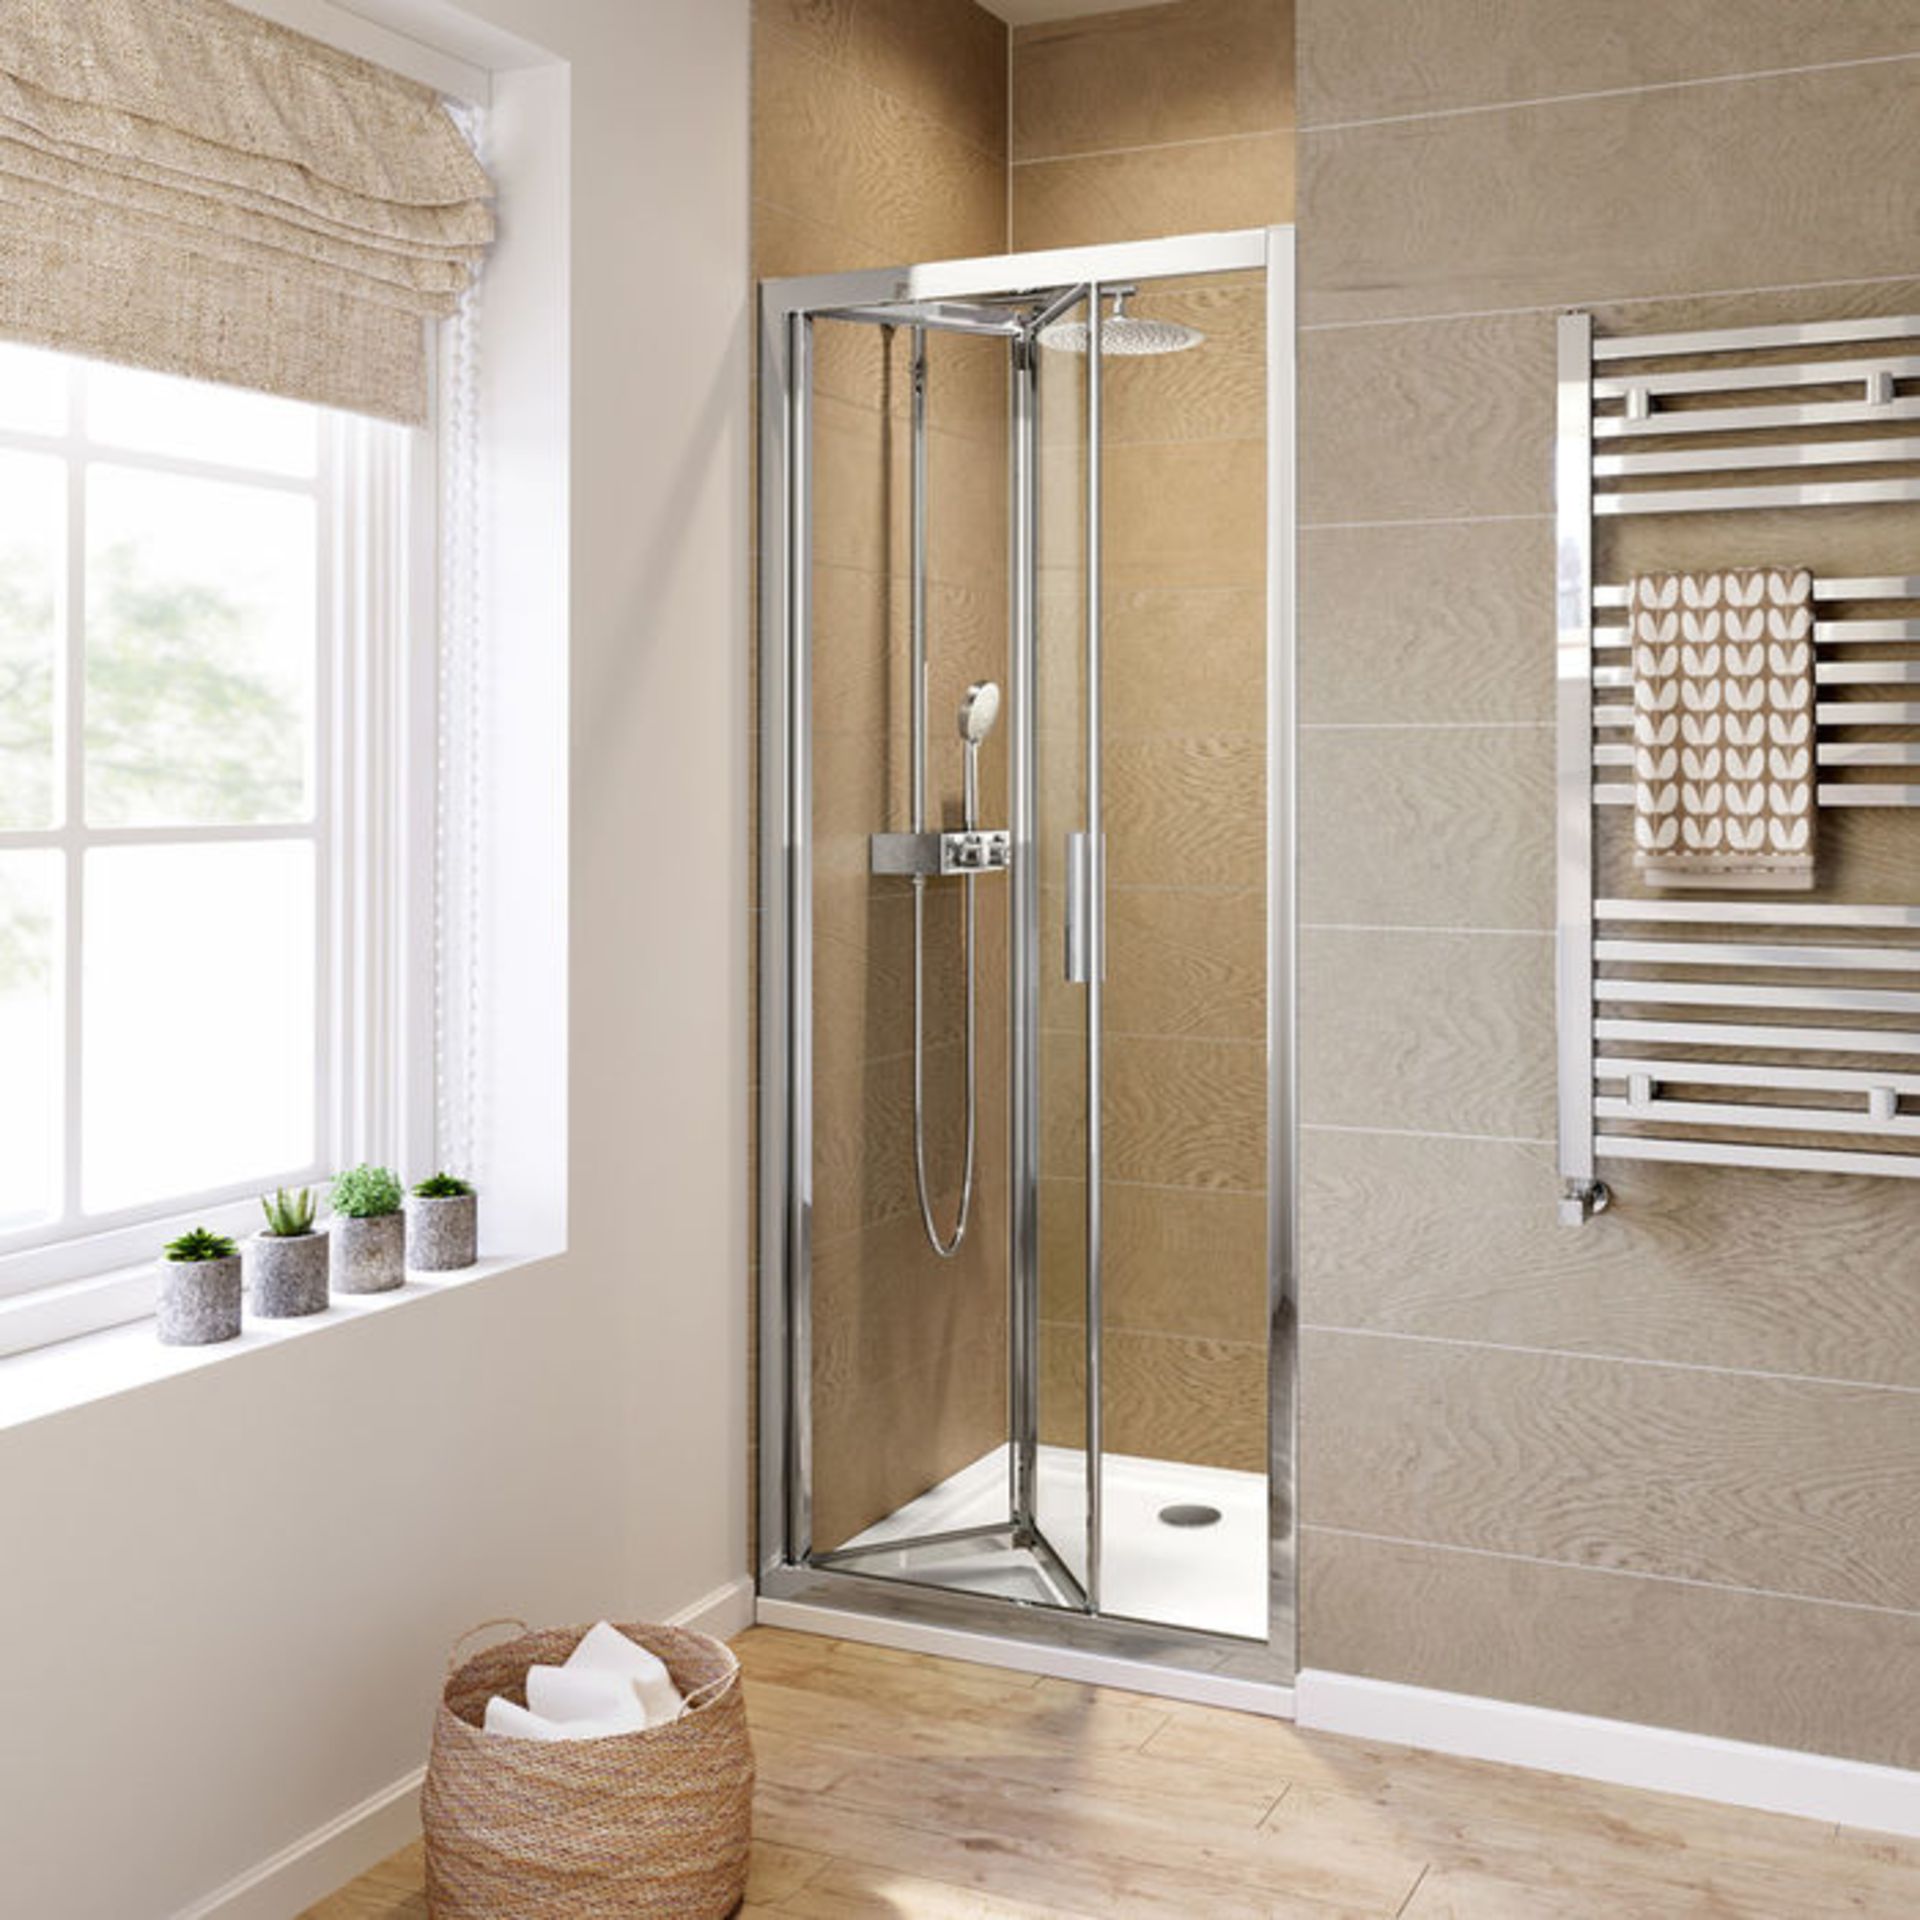 (TY118) 800mm - 6mm - Elements EasyClean Bifold Shower Door. RRP £299.99. 6mm Safety Glass - - Image 3 of 3